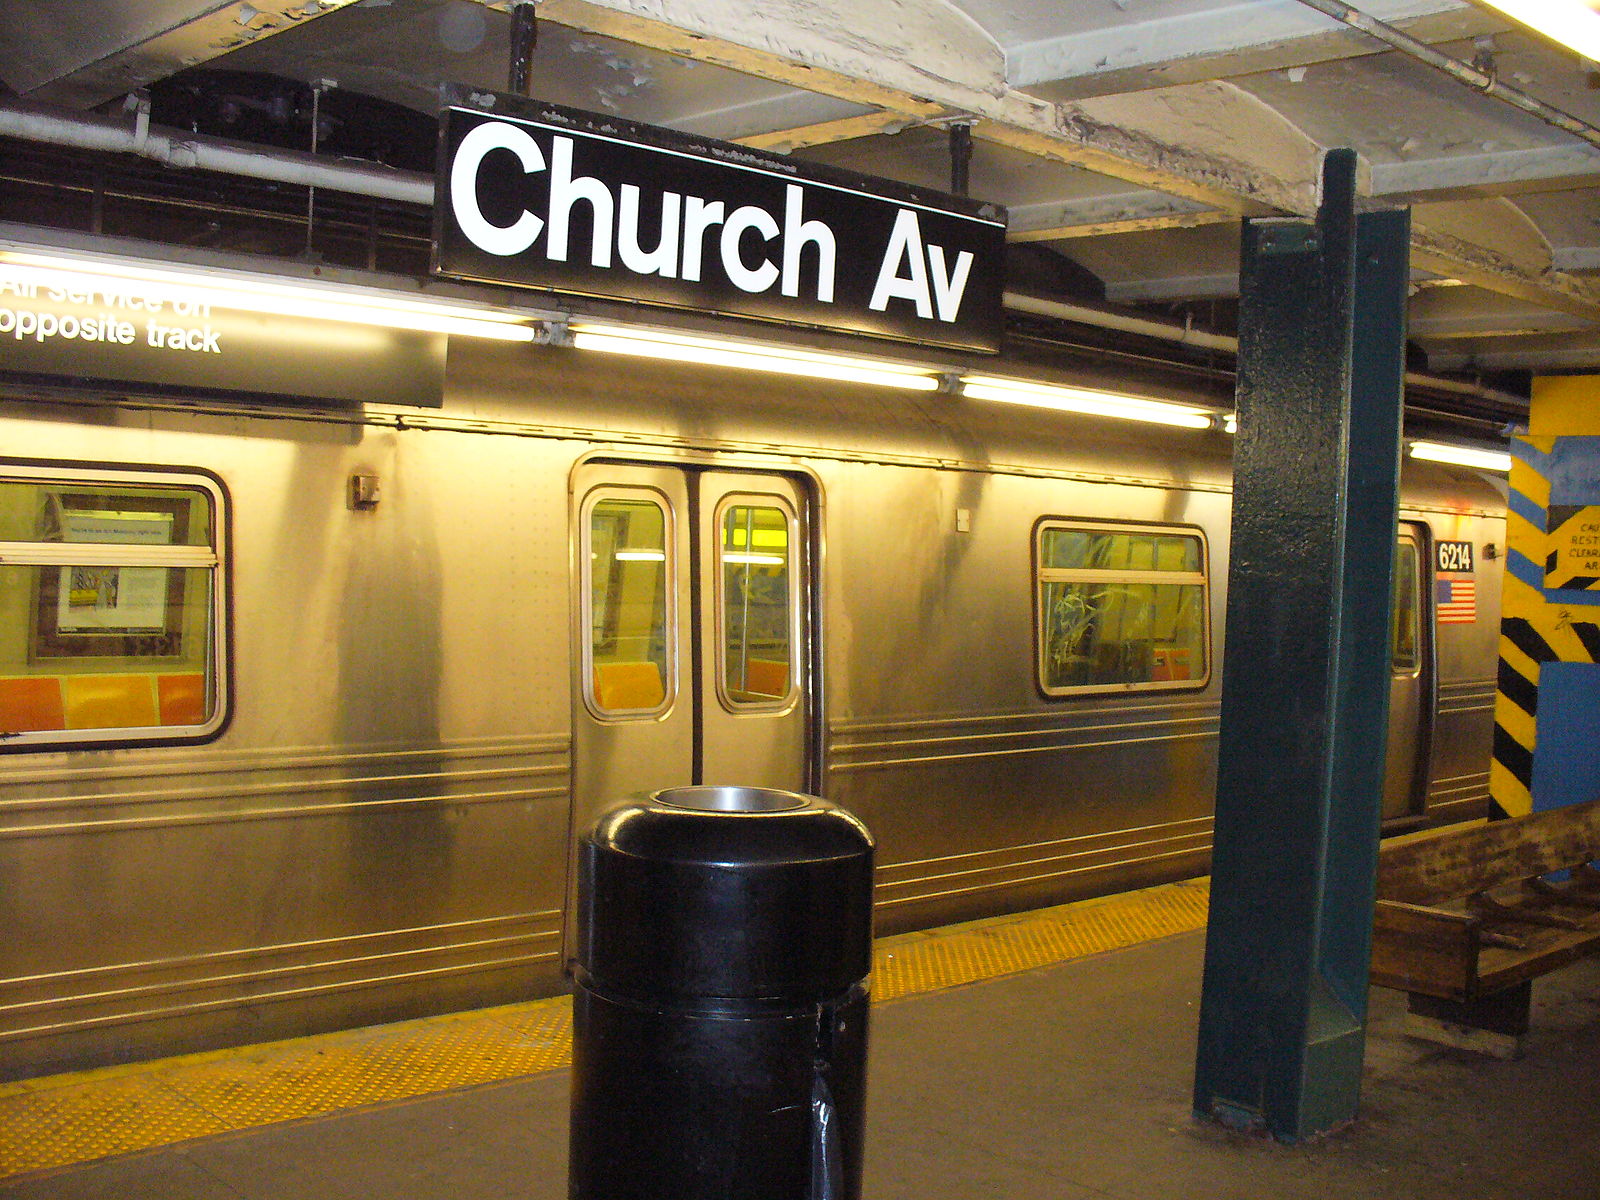 Black Woman Beaten and Stabbed On Subway Platform in Possible Hate Crime, Police Say